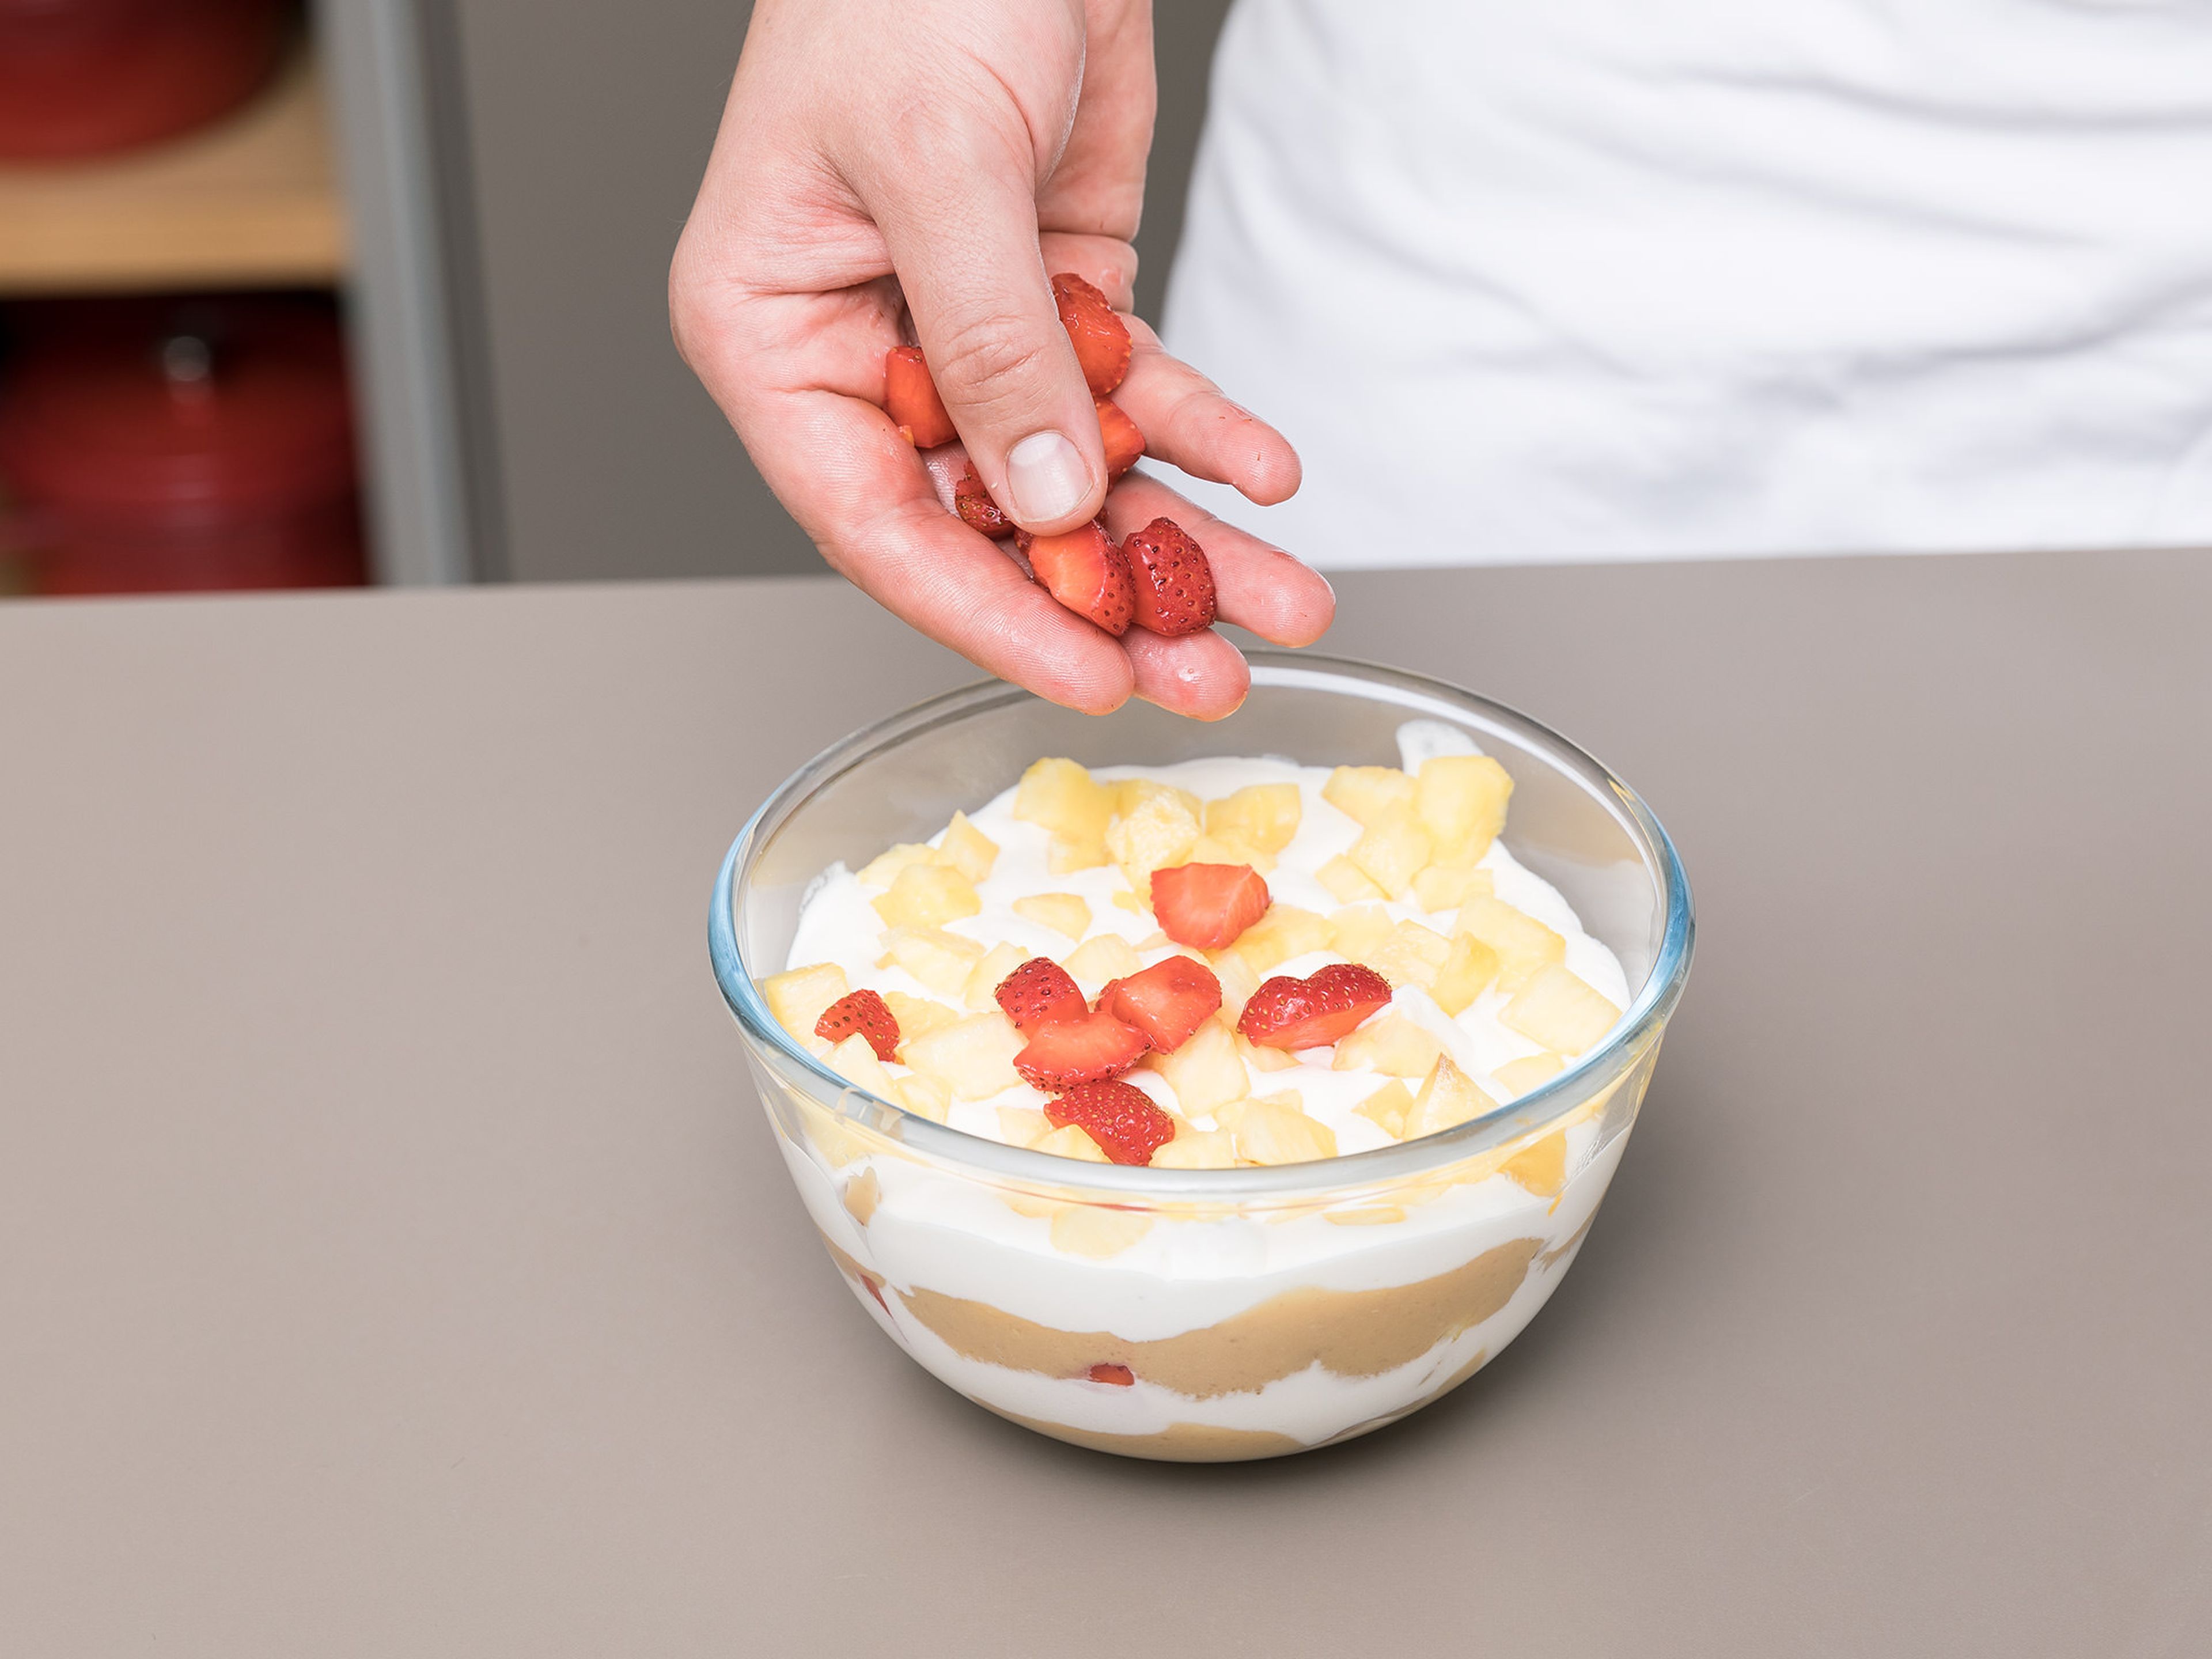 In a bowl, crush digestive biscuits by hand into approx. 2-cm/1-inch. pieces. Add half of the biscuit to the bottom of a serving bowl, then layer with half of the toffee mixture, half of the whipped cream, and add half of the pineapple and strawberry pieces on top. Repeat layers until everything is used up. Enjoy!